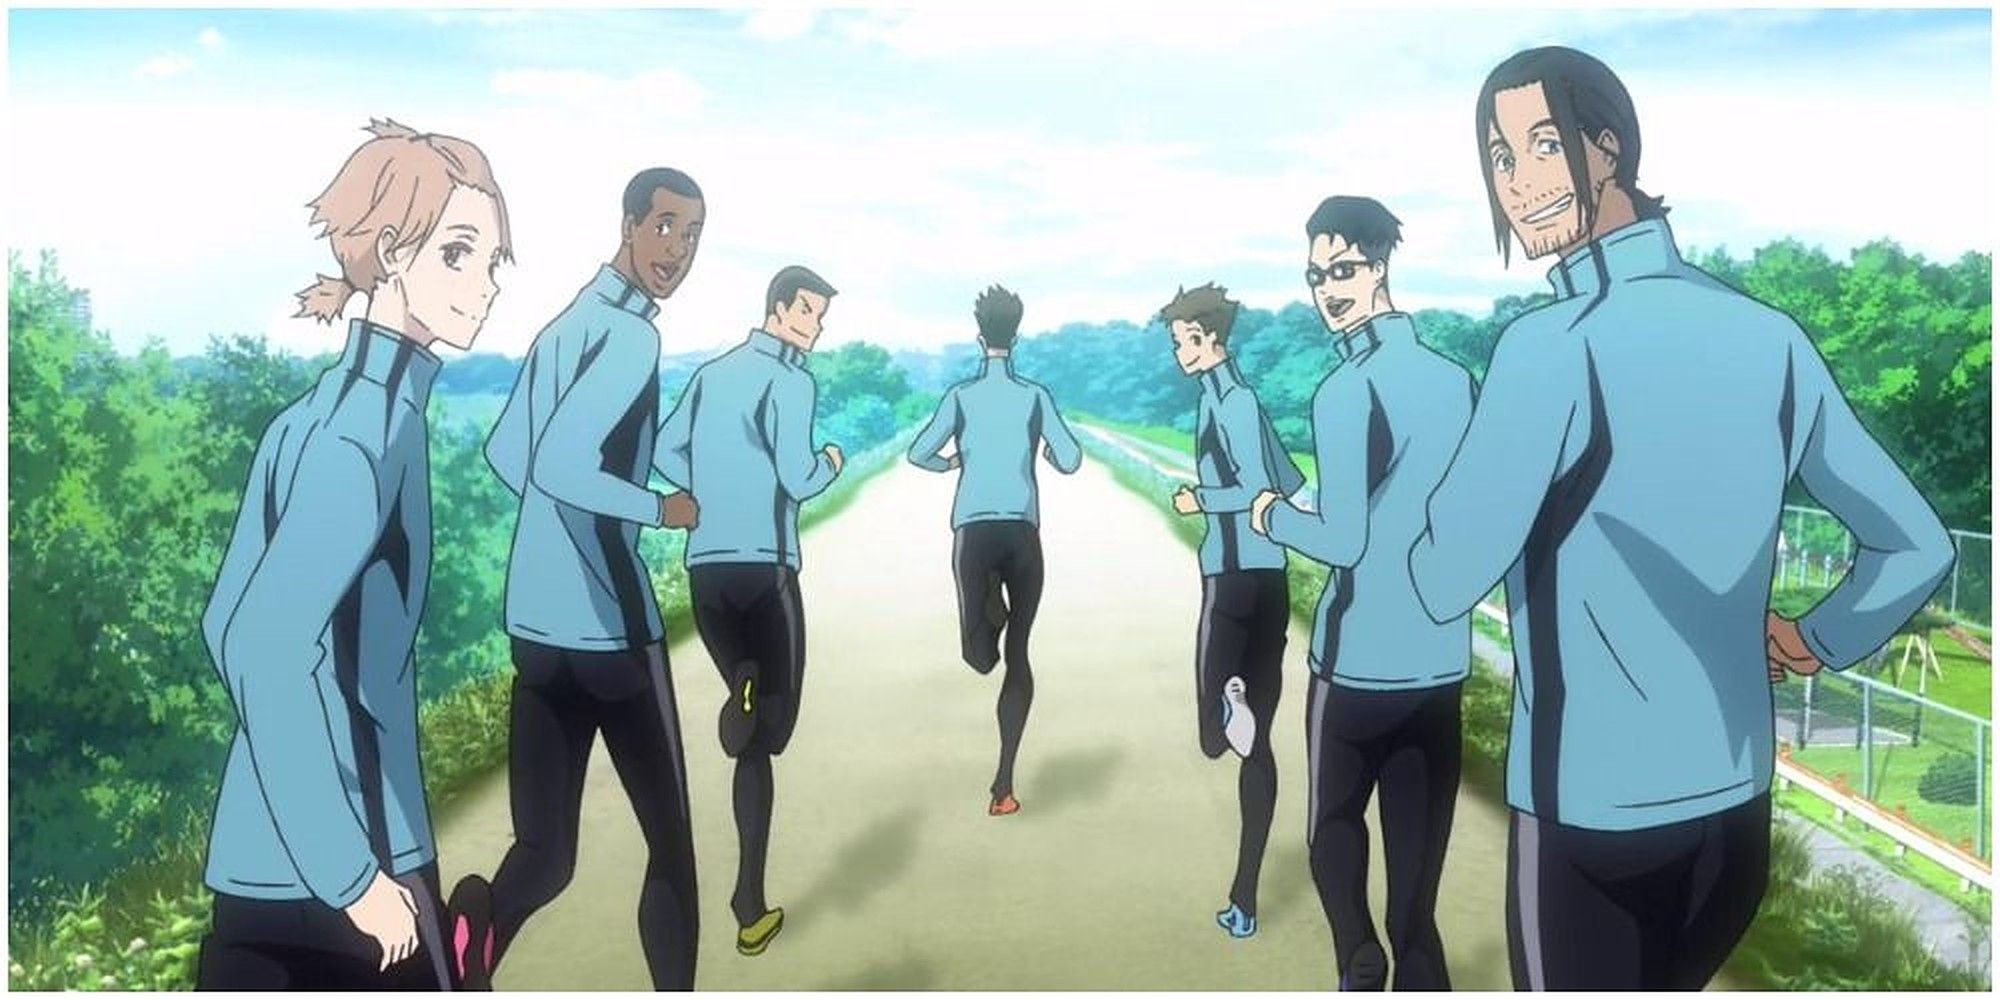 A group of runners looking back at someone